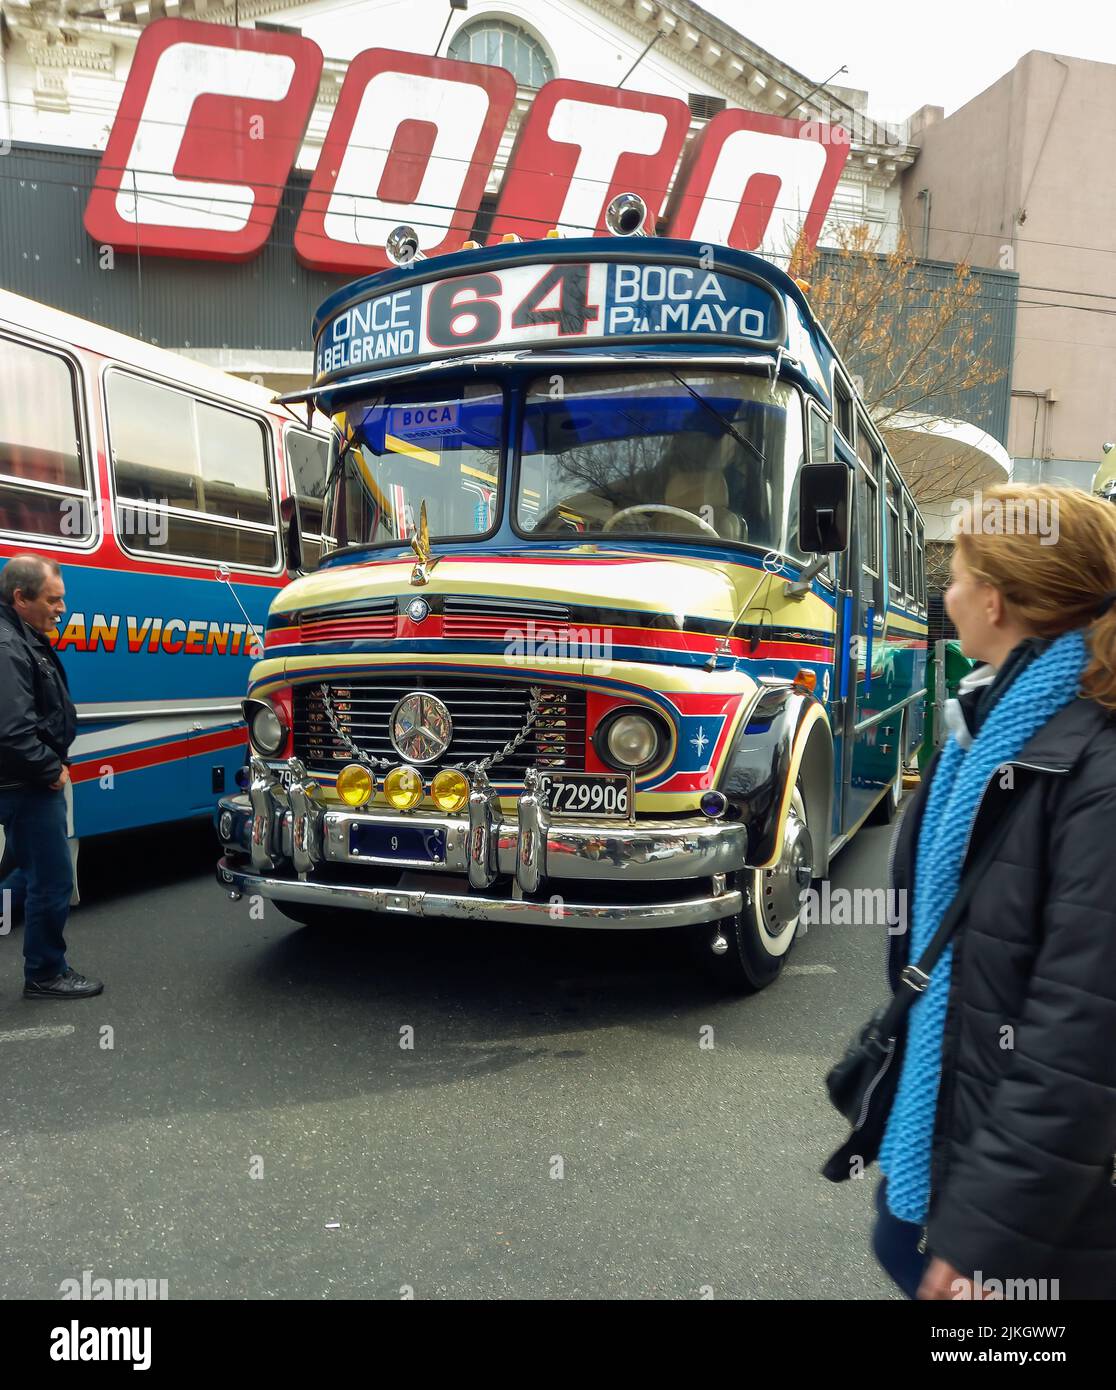 People admire an old classic Mercedes Benz 1114 bus 1965-1974. Public passenger transport in Buenos Aires. Traditional fileteado ornaments Stock Photo